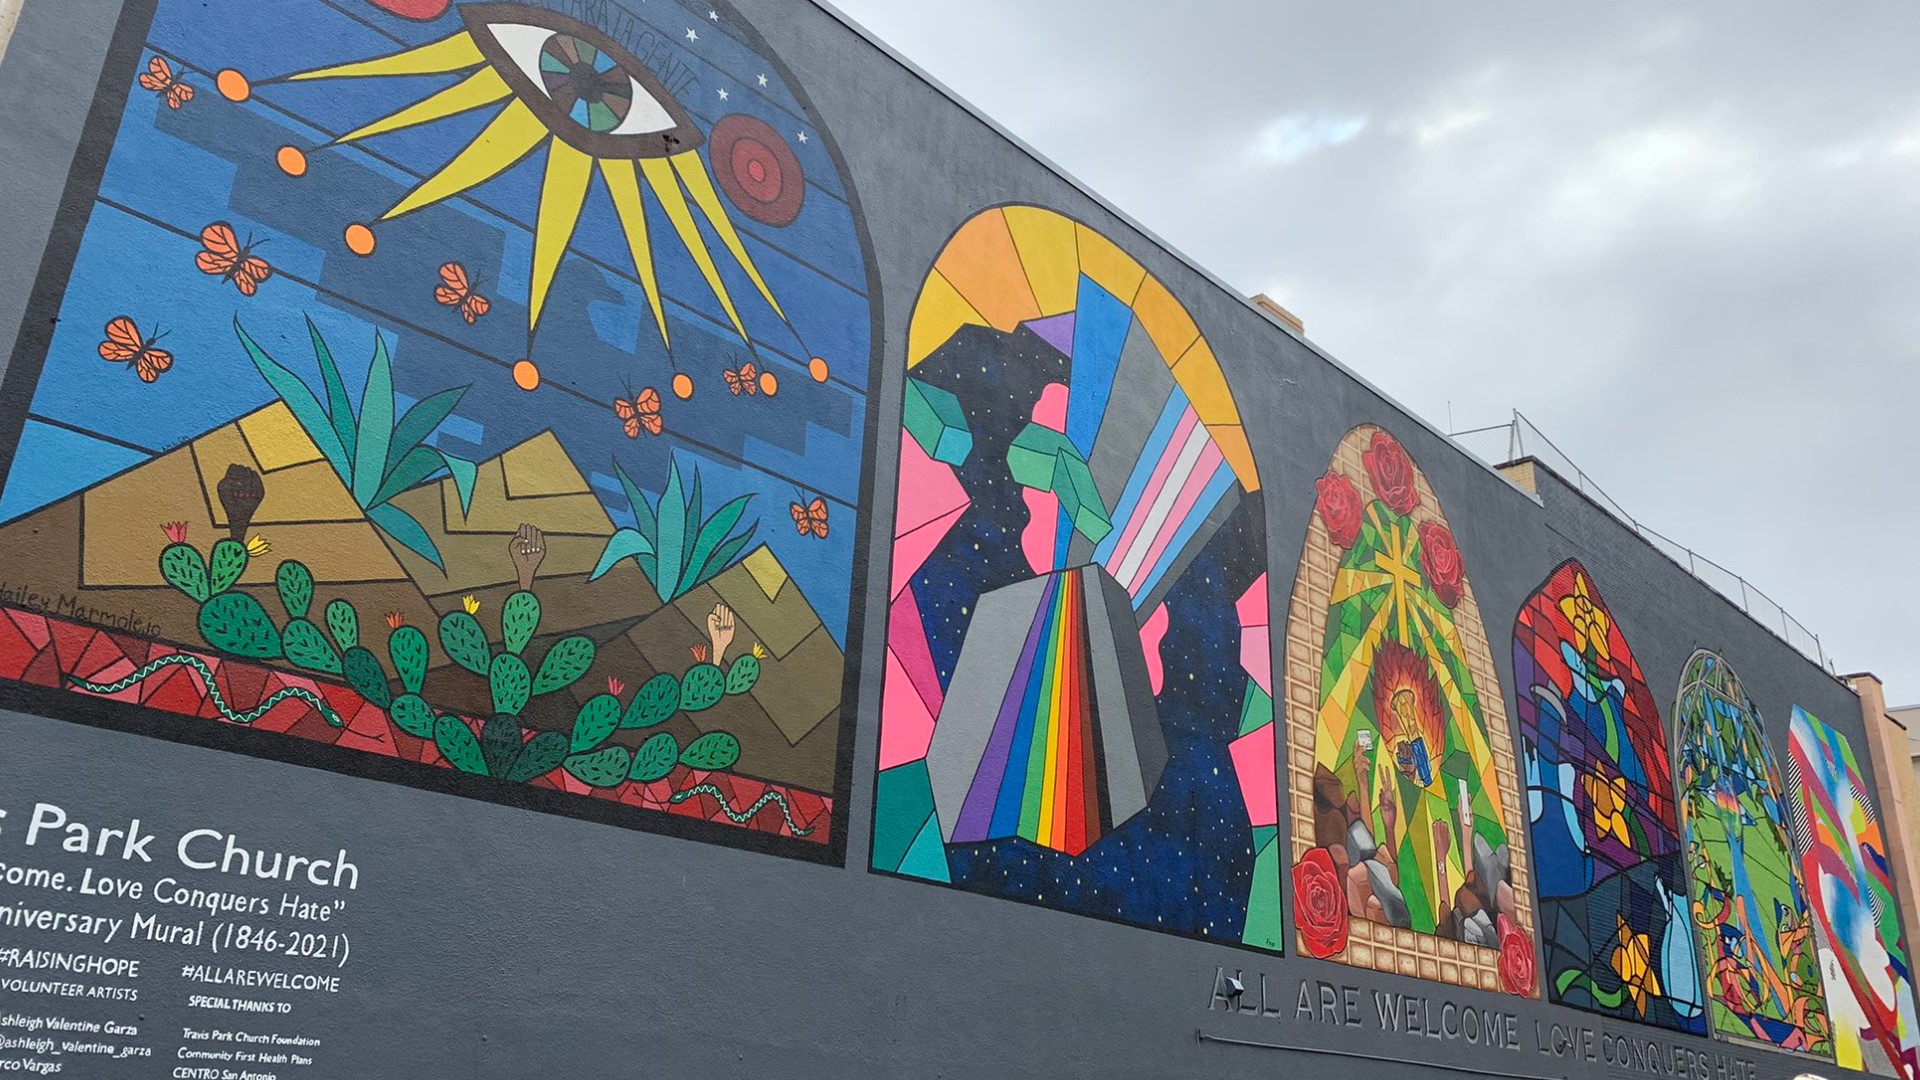 A large mural with six different visions representing the diversity and inclusion within San Antonio had its official debut on Sunday.